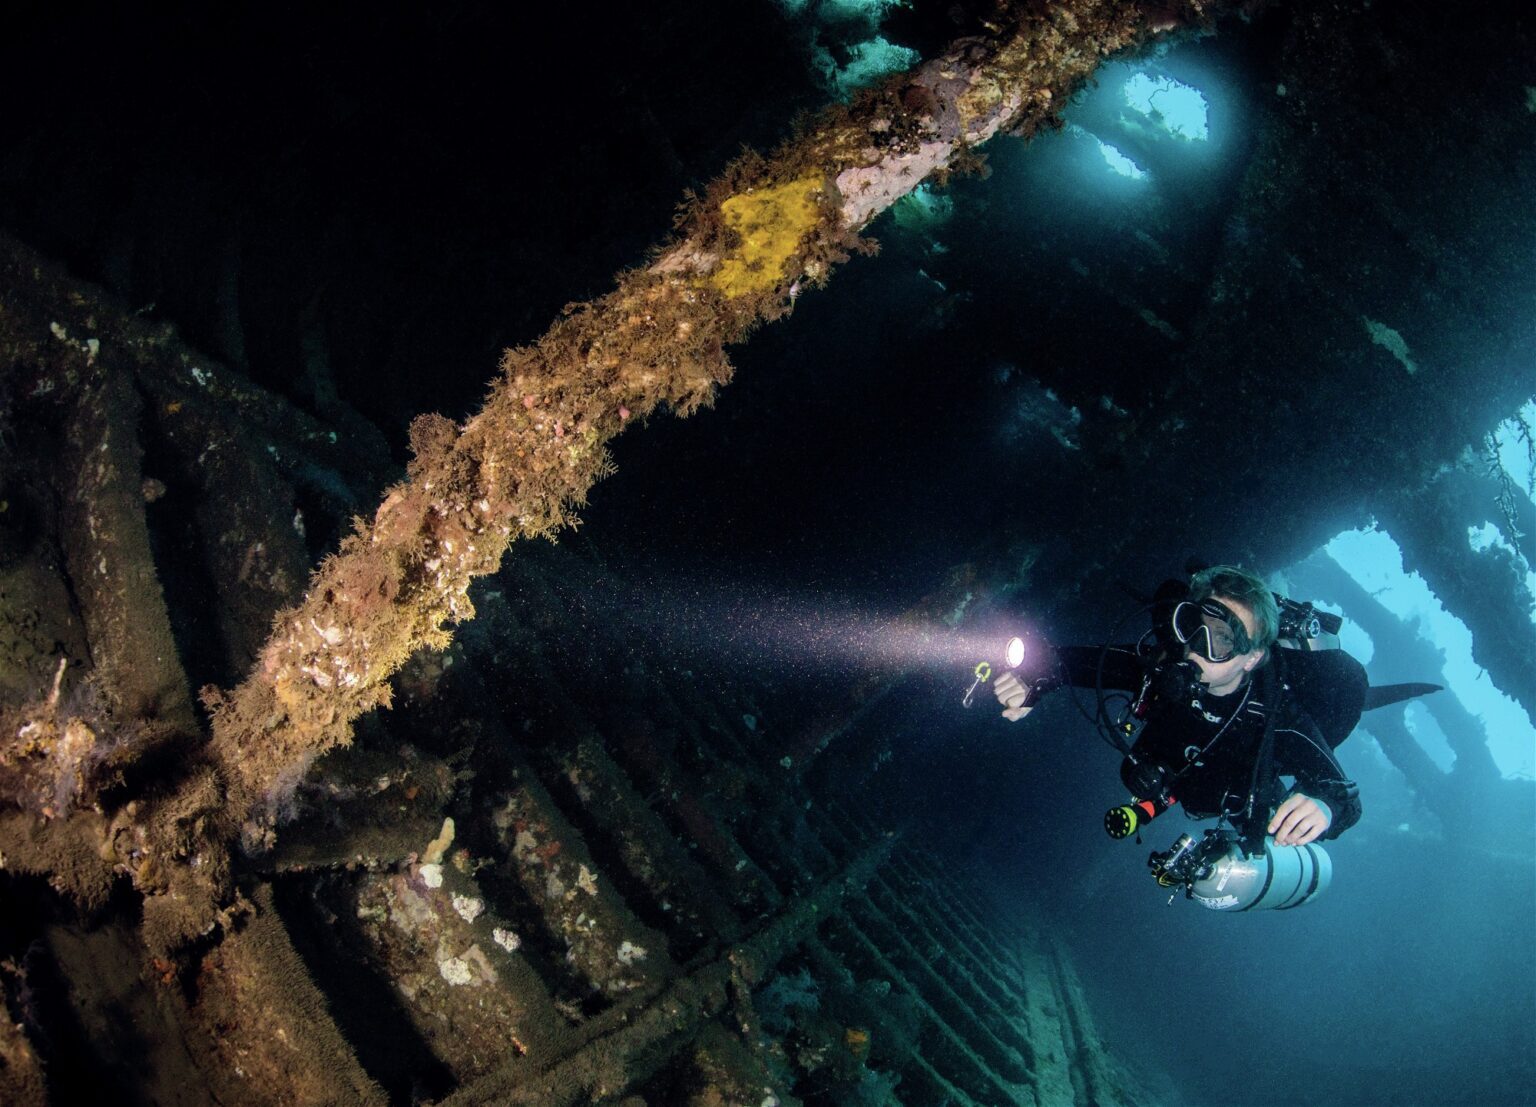 Inside the Mola’s Wreck